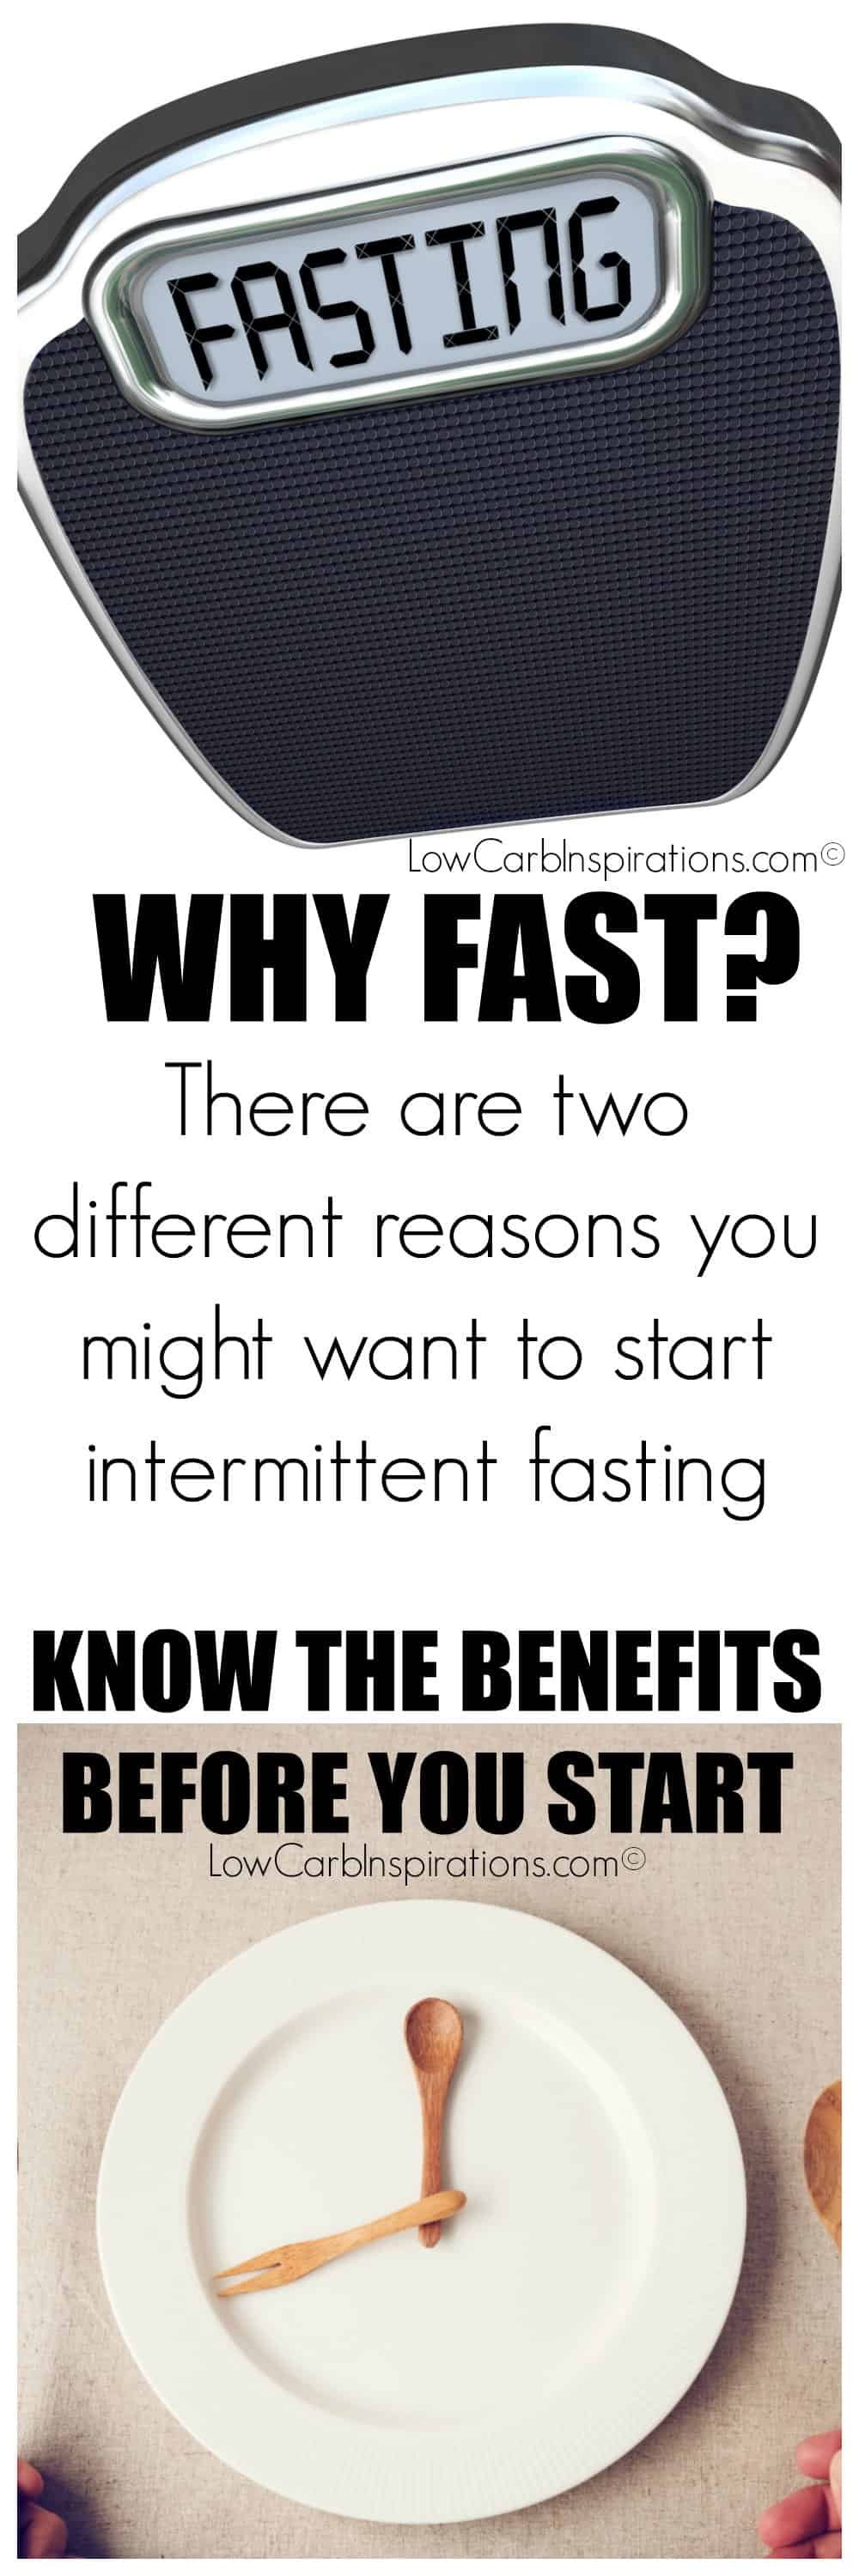 Autophagy and the Benefits of Intermittent Fasting